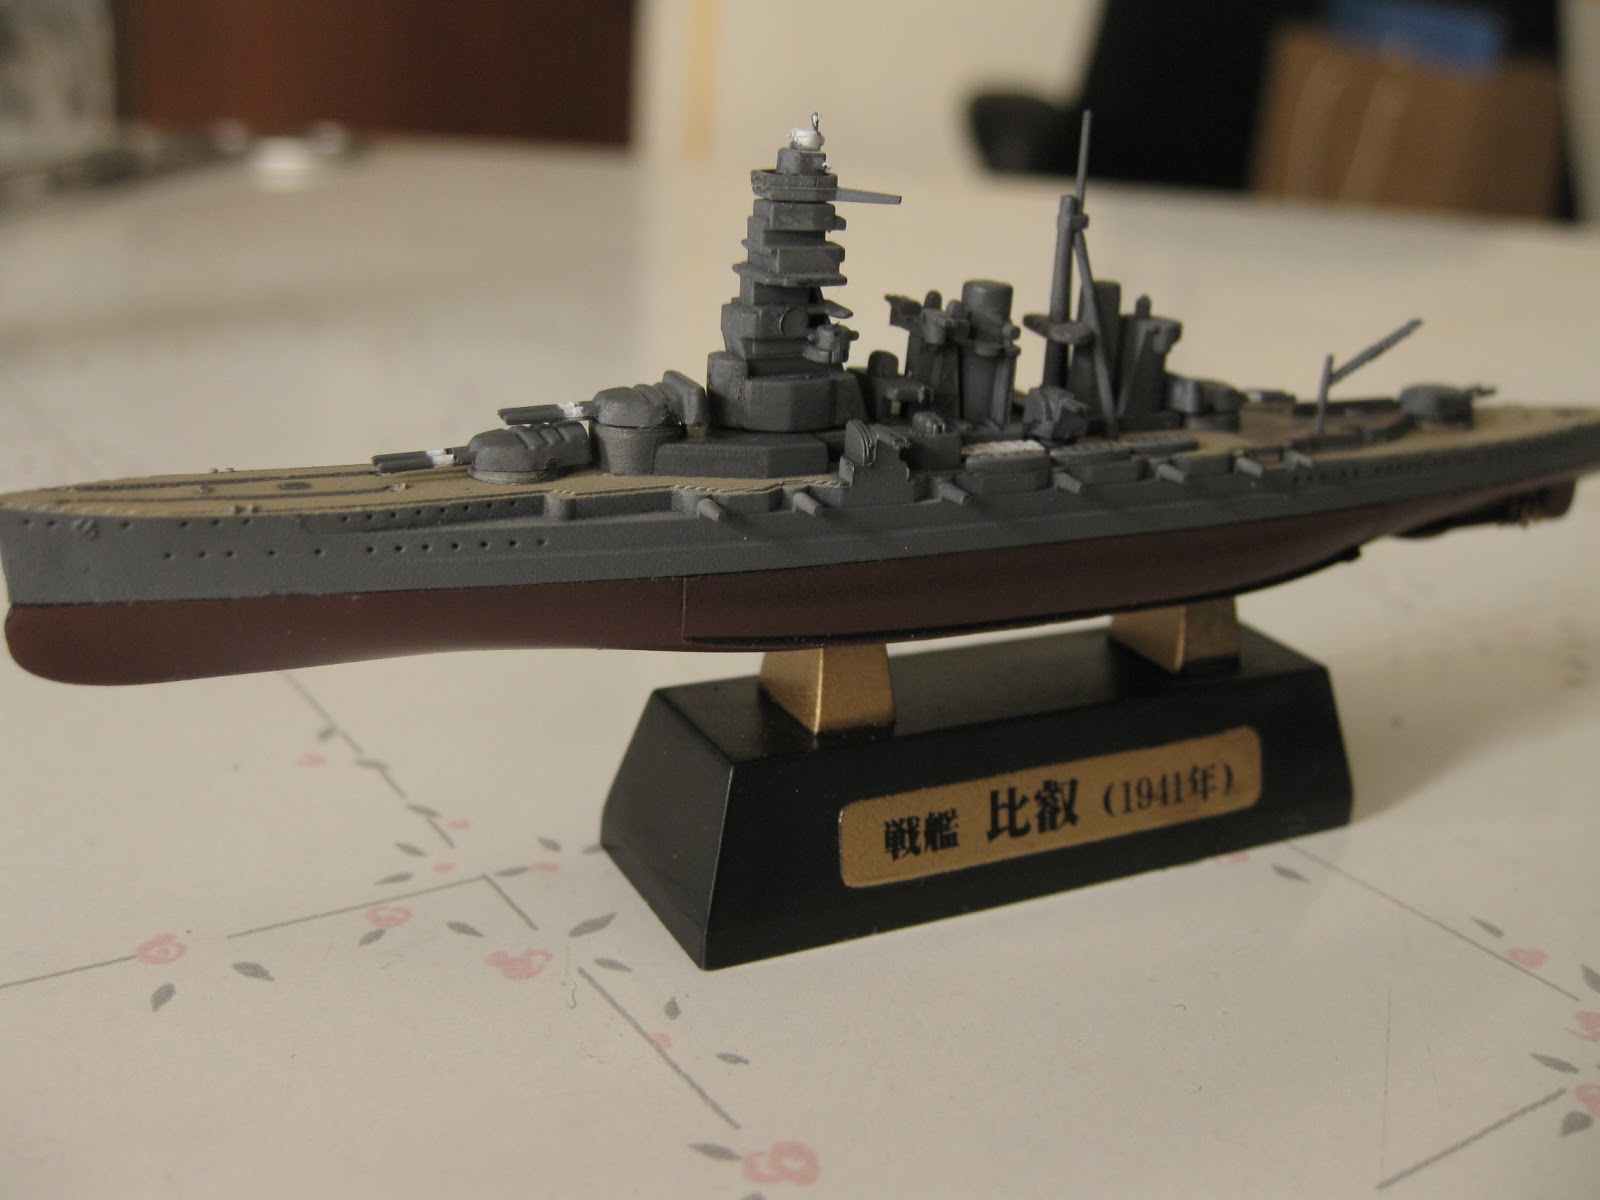 Raymond S World Of Scale Models Collectibles Toys Figures Sci Fi And Anime 1 00 Hiei Japanese Battleship That Took Part In The Attack On Pearl Harbor